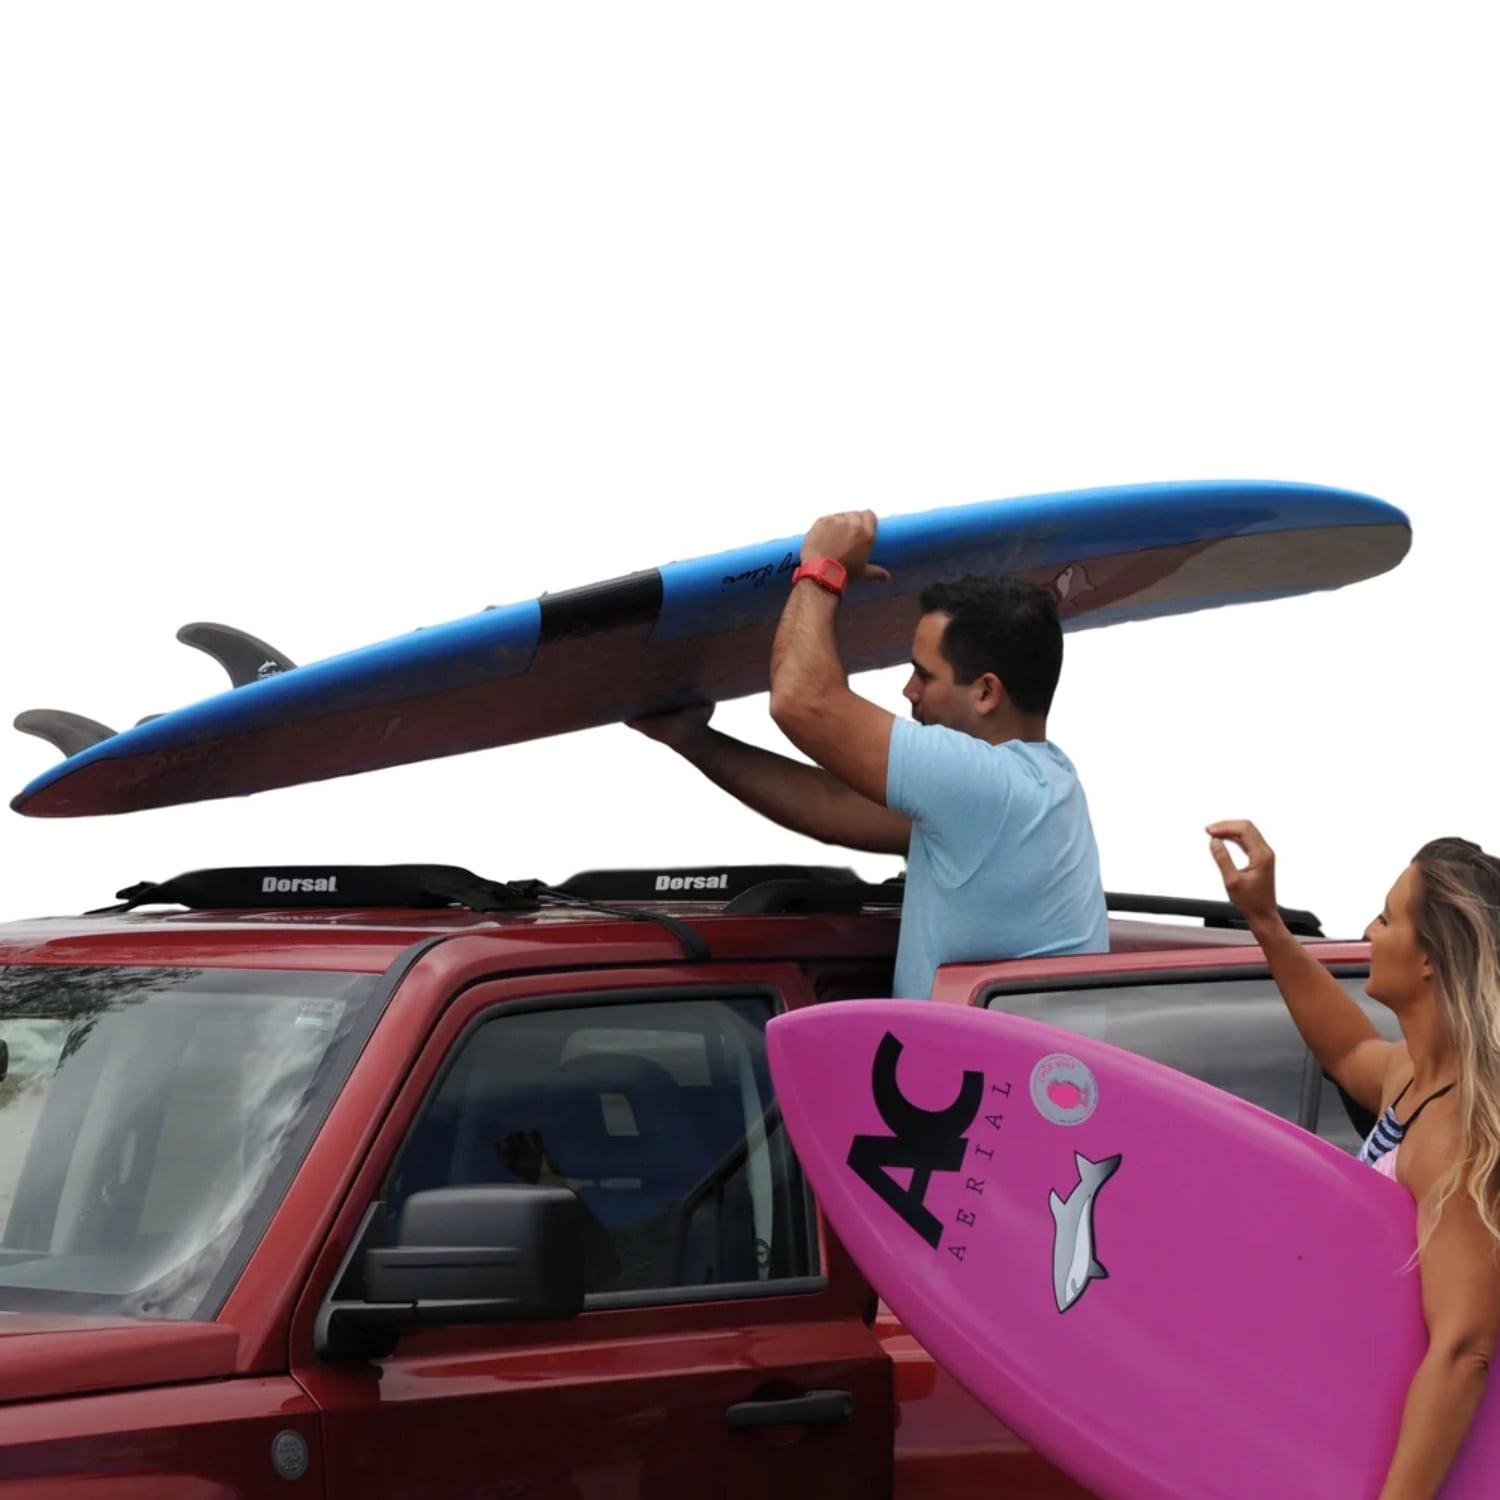 Snowboard LINGVUM Soft Roof Rack Pads with Two 15 Ft Wrap-Rax Straps Surfboard Black/Blue SUP Paddleboard 28” Premium Car Carrier Racks for Kayak 